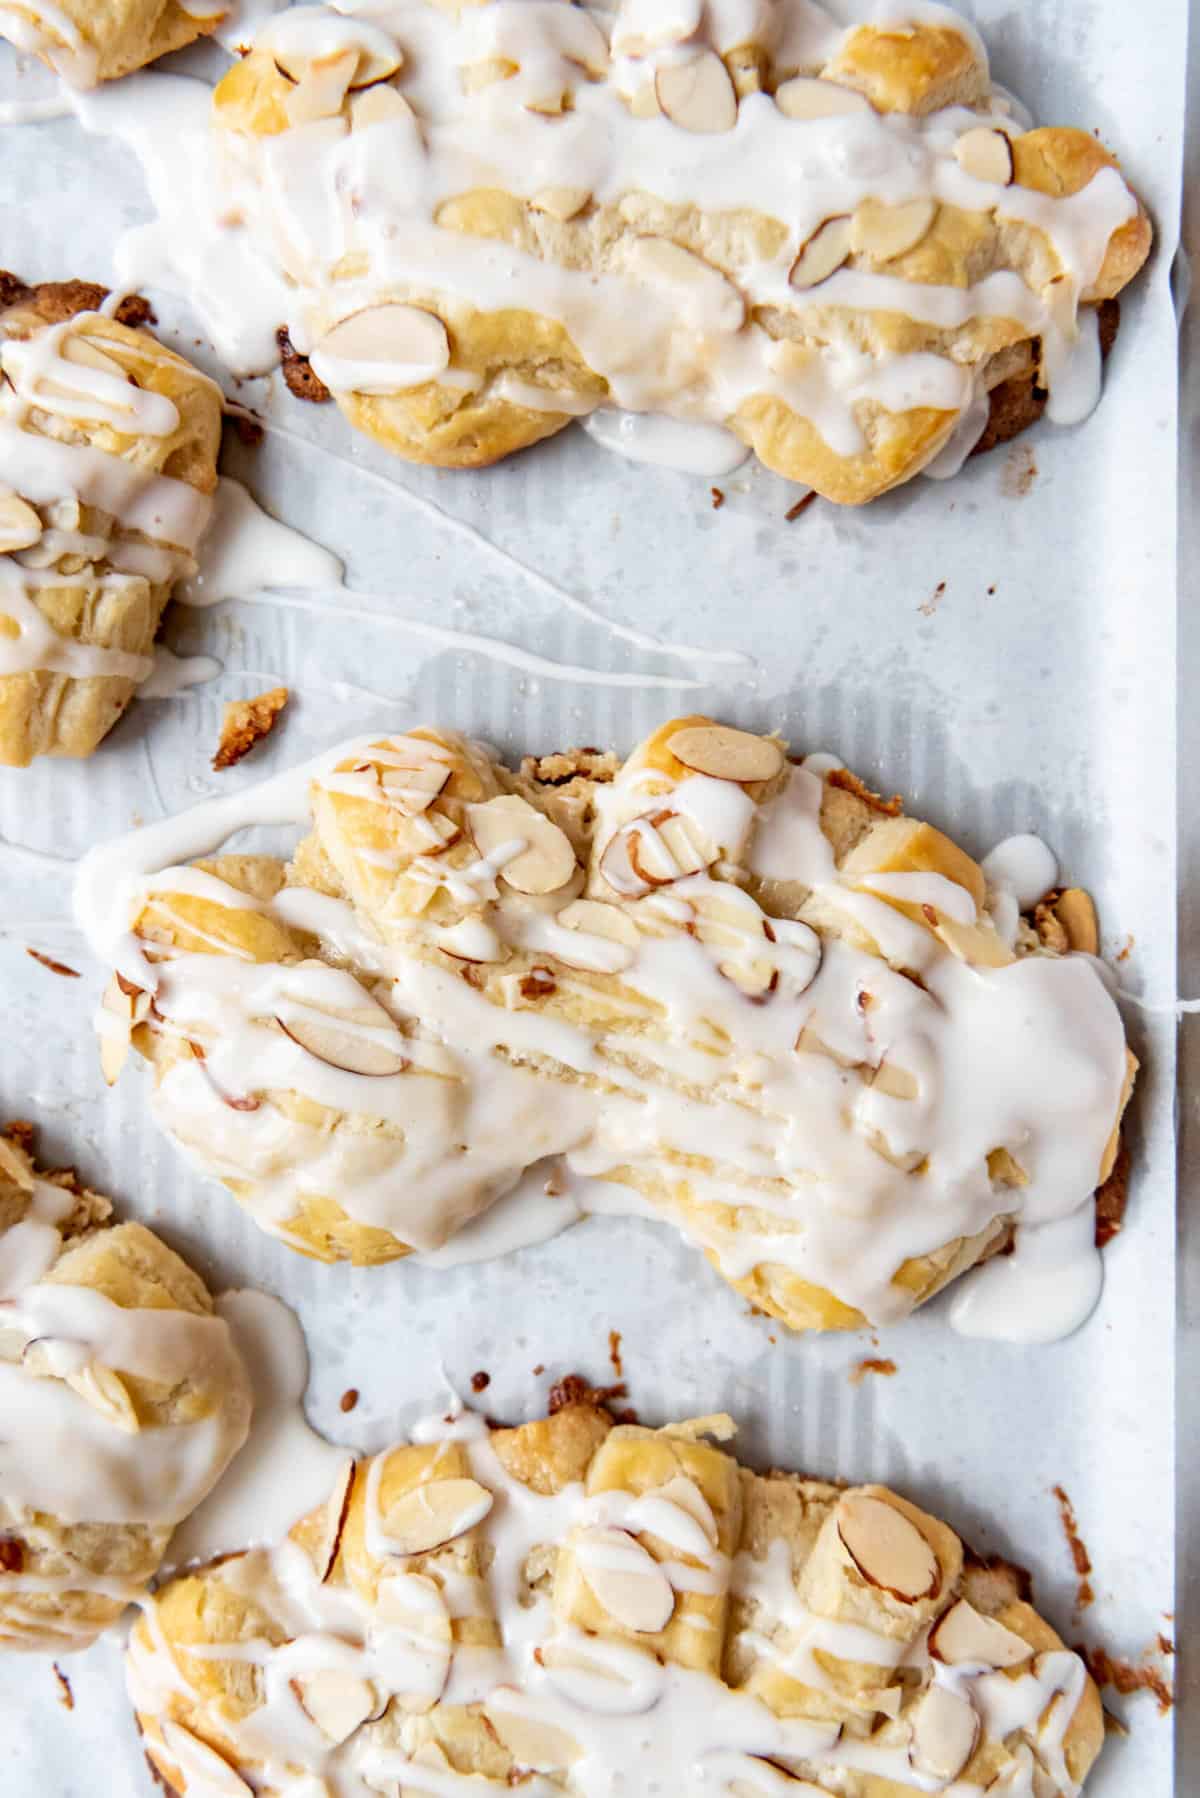 An overhead image of glazed almond bear claws on a baking sheet.